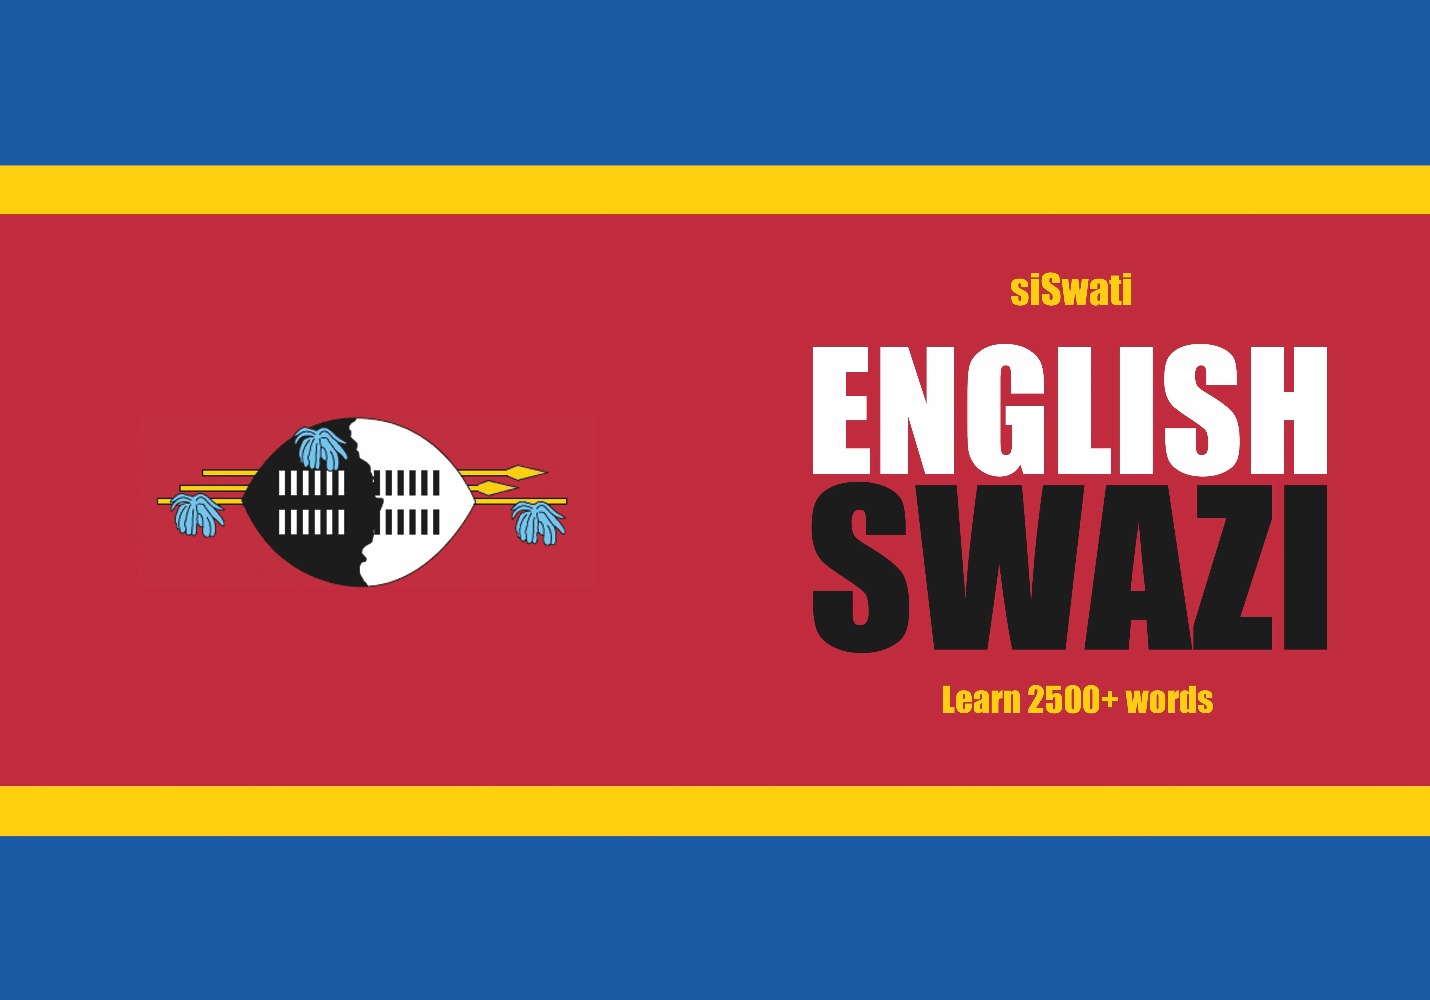 Swazi language learning notebook cover